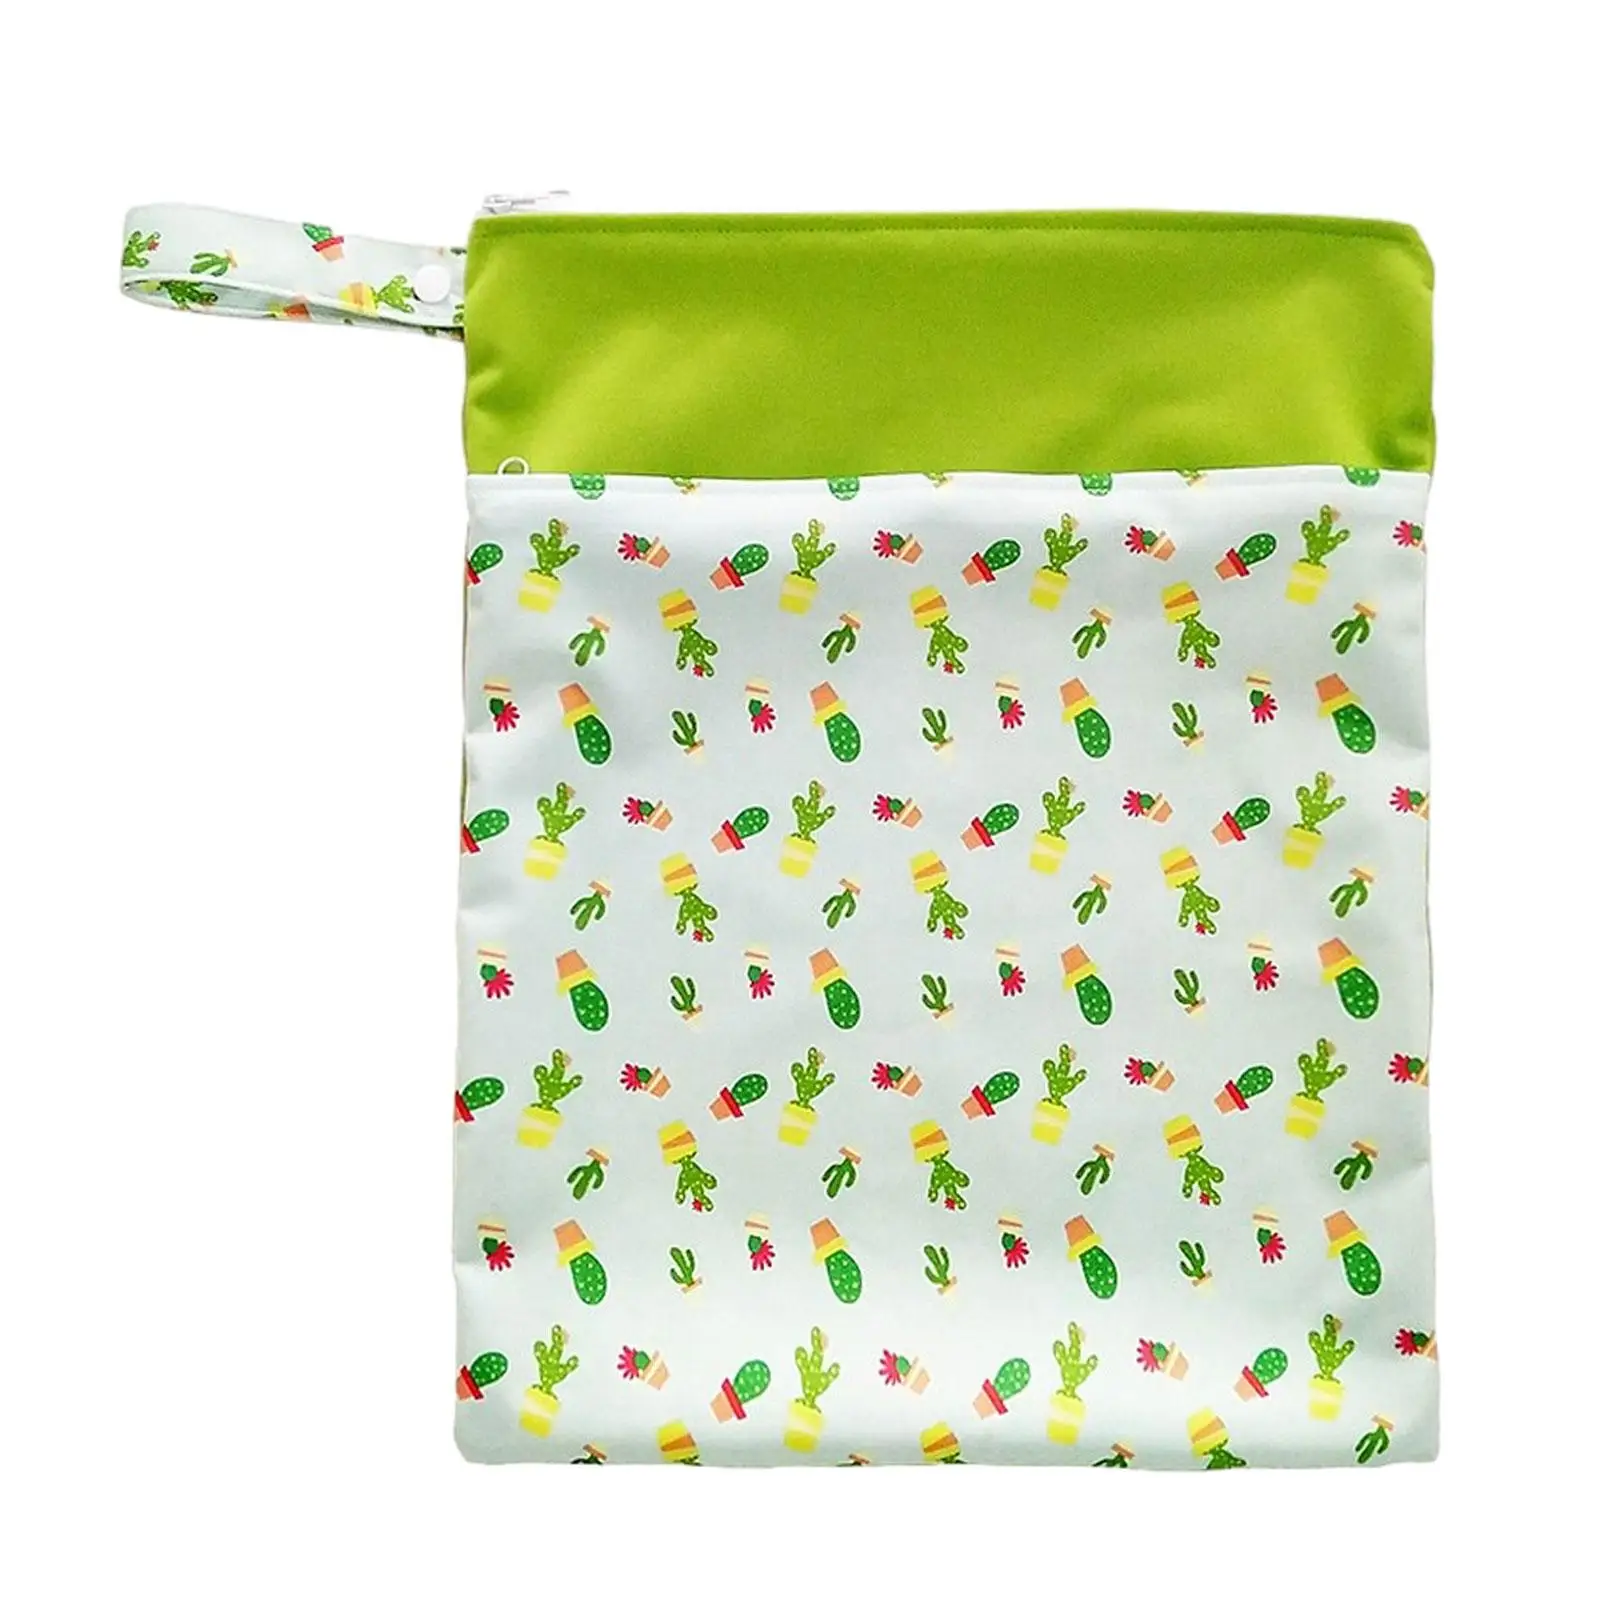 Wet and Dry Bag for Baby Cloth Diapers Portable Baby Nappy Laundry Storage Bag Double Zippers Pockets for Swimsuits Wet Clothes